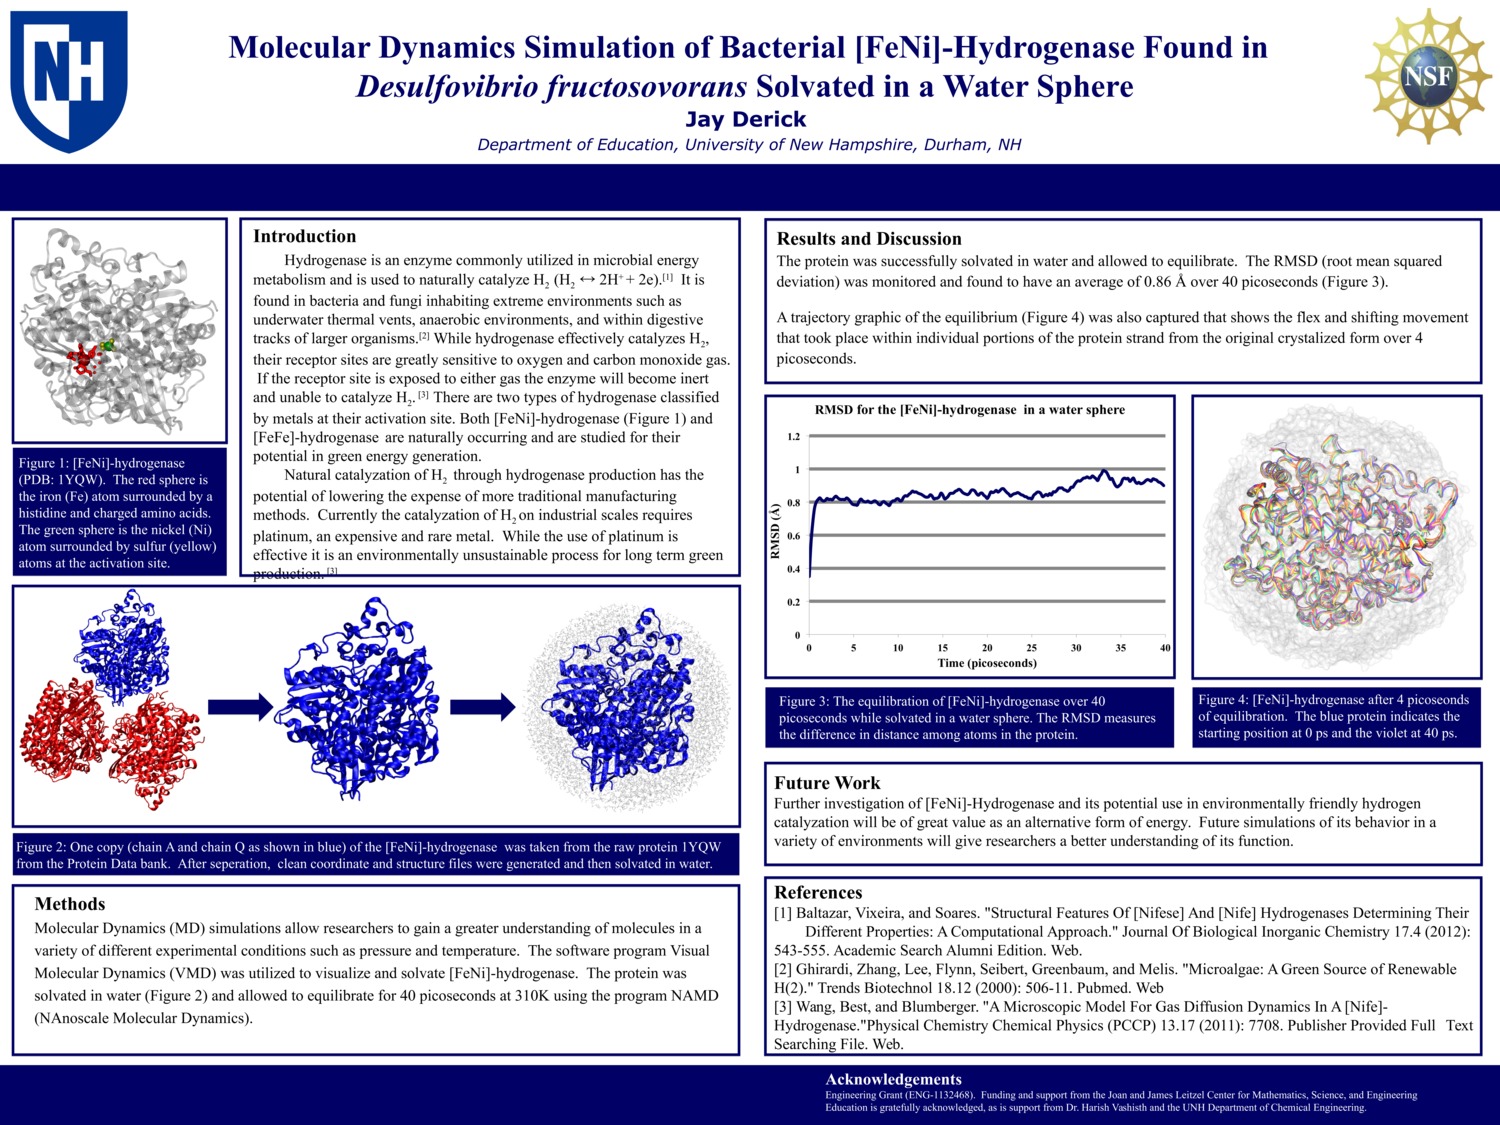 Molecular Dynamics Simulation Of Bacterial [Feni]-Hydrogenase Found In Desulfovibrio Fructosovorans Solvated In A Water Sphere   by jderick